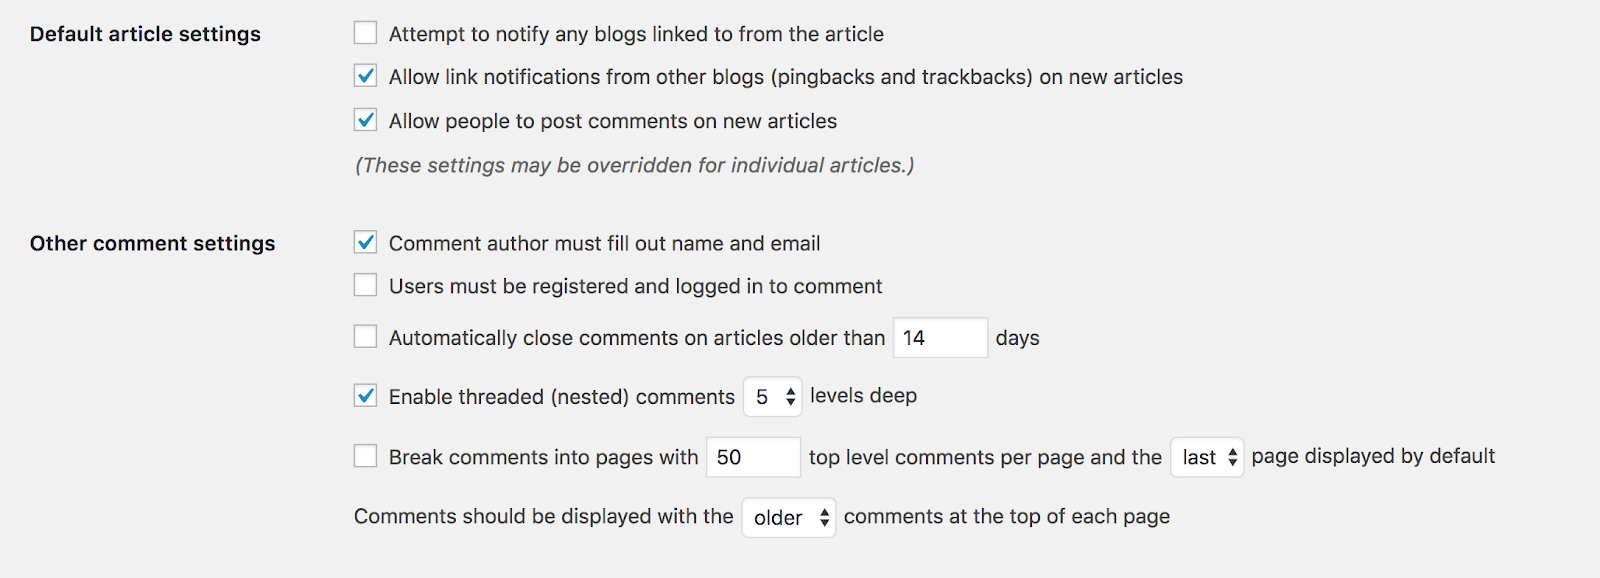 What Does WordPress Offer for Comment Management?